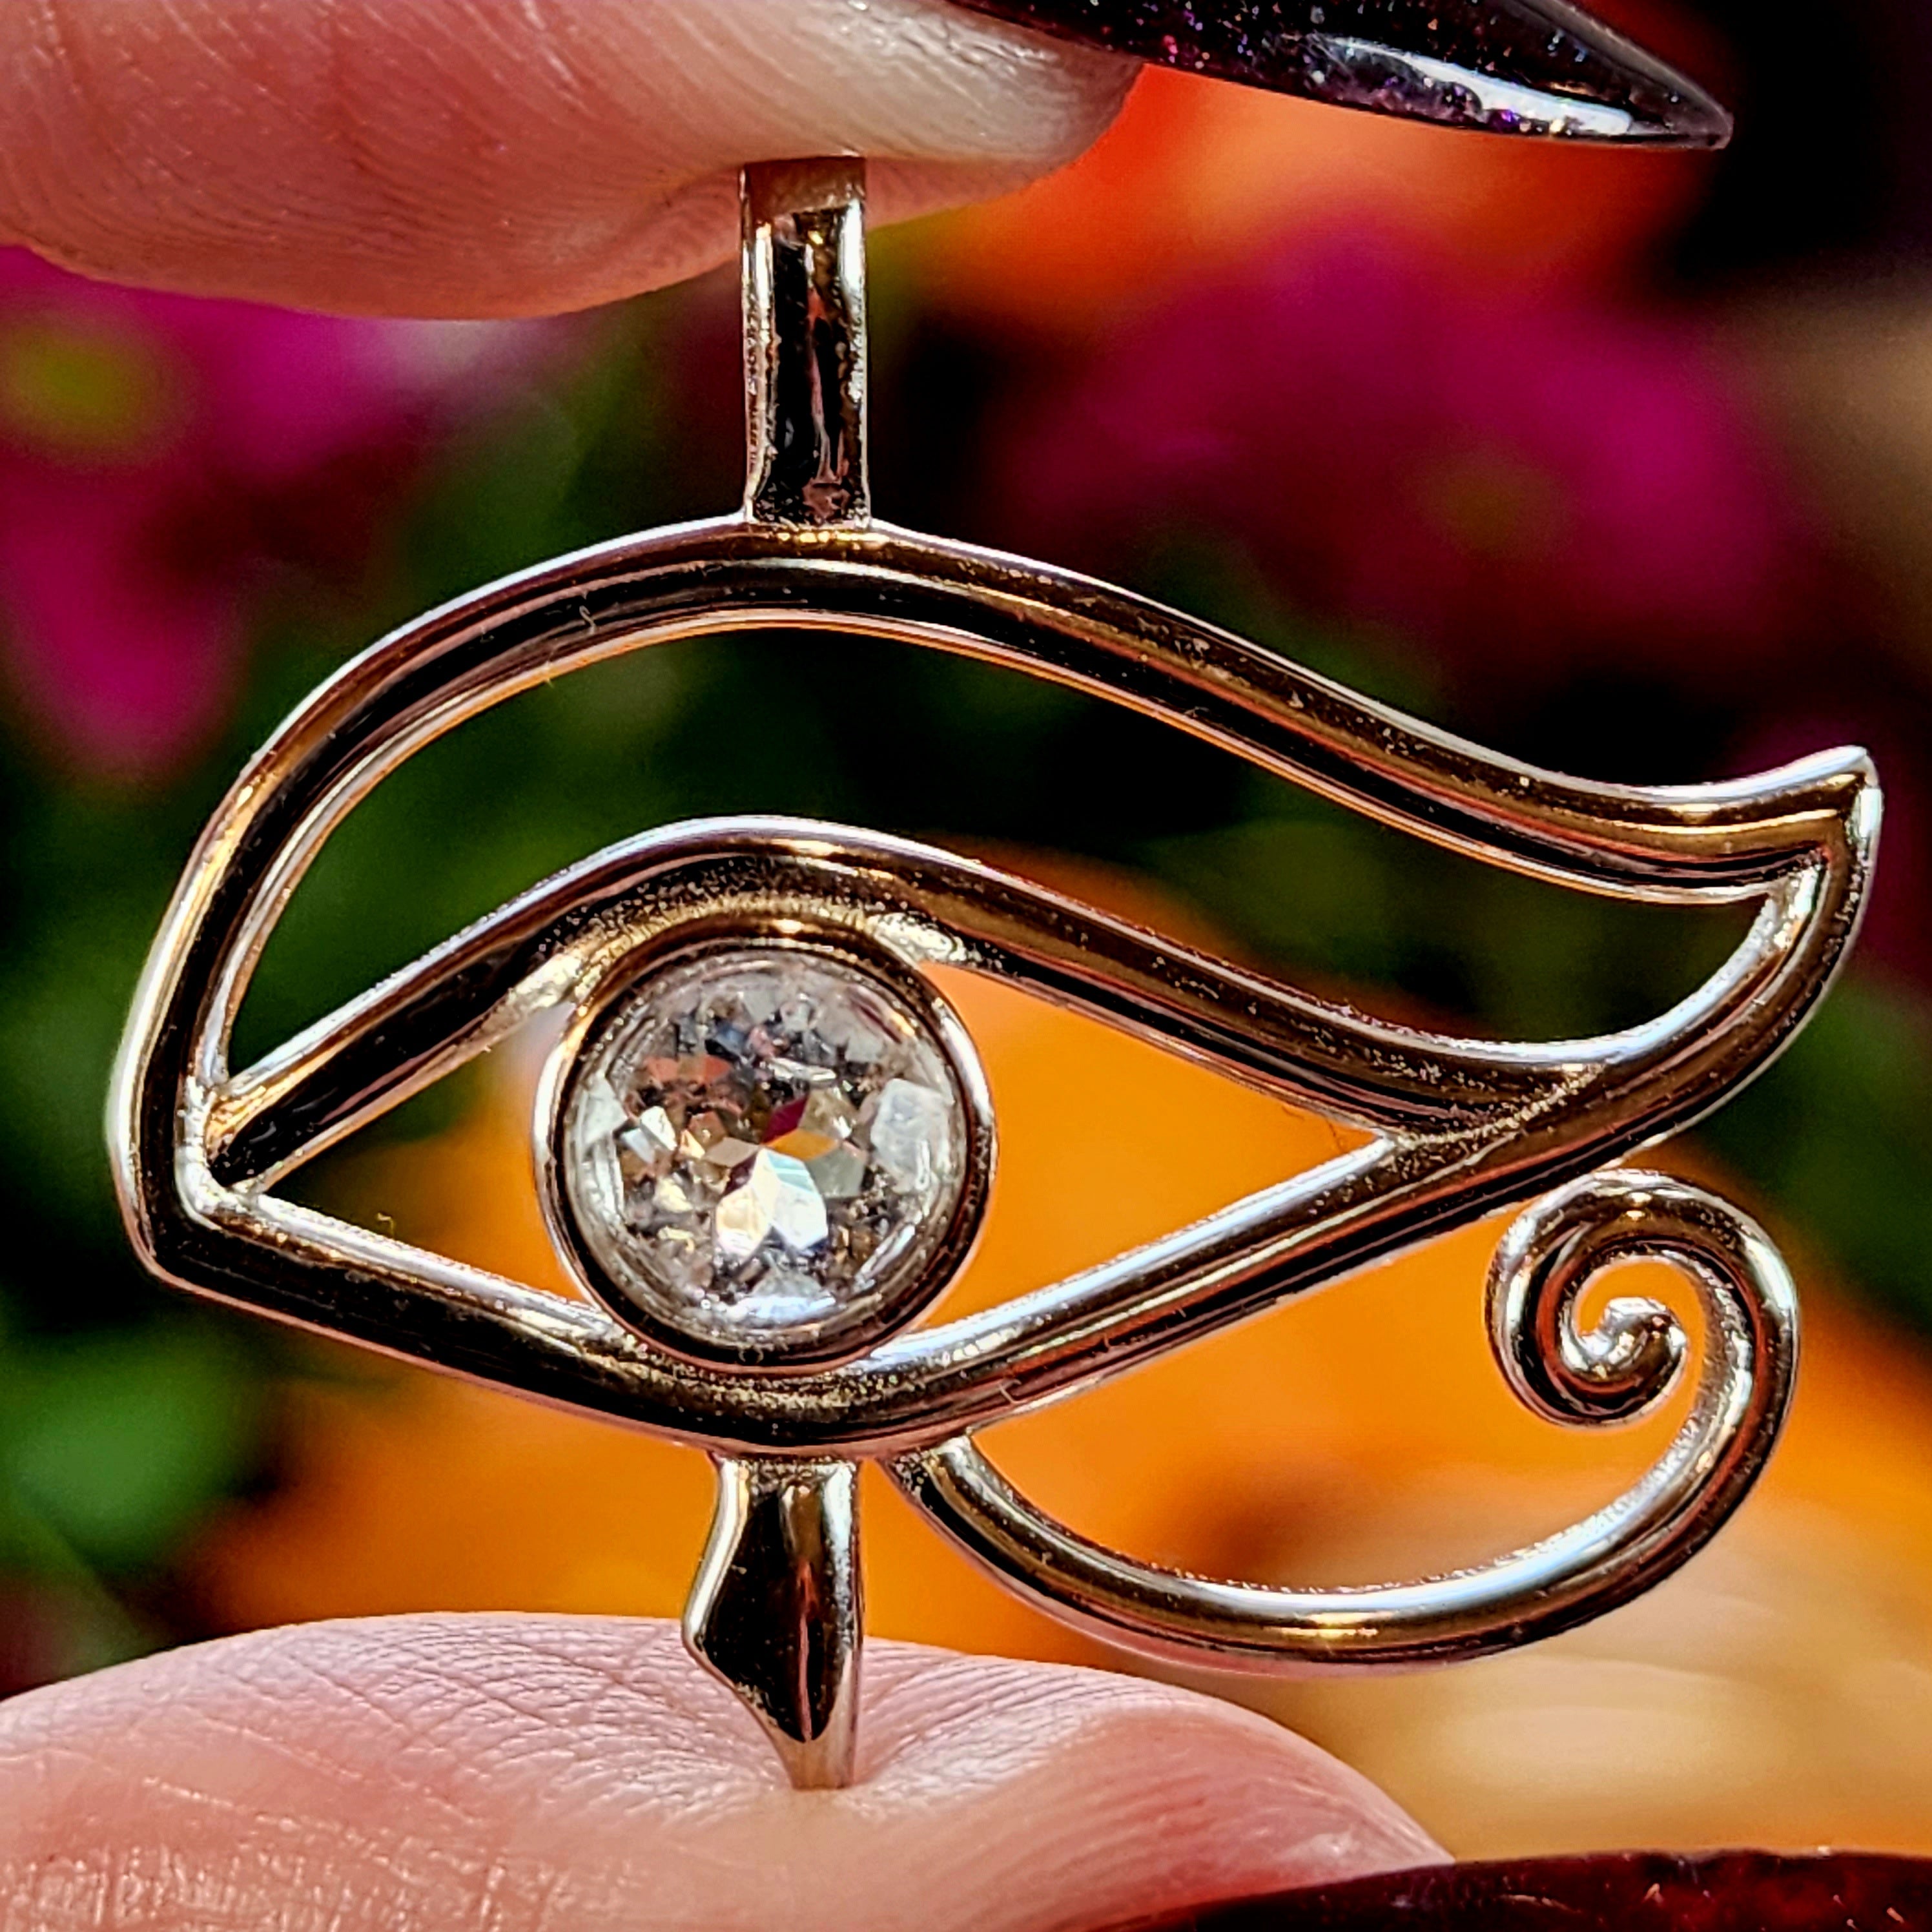 White Topaz Eye of Horus Amulet Pendant .925 Silver for Health, Protection, Amplifying Intentions & Accelerating Manifestations